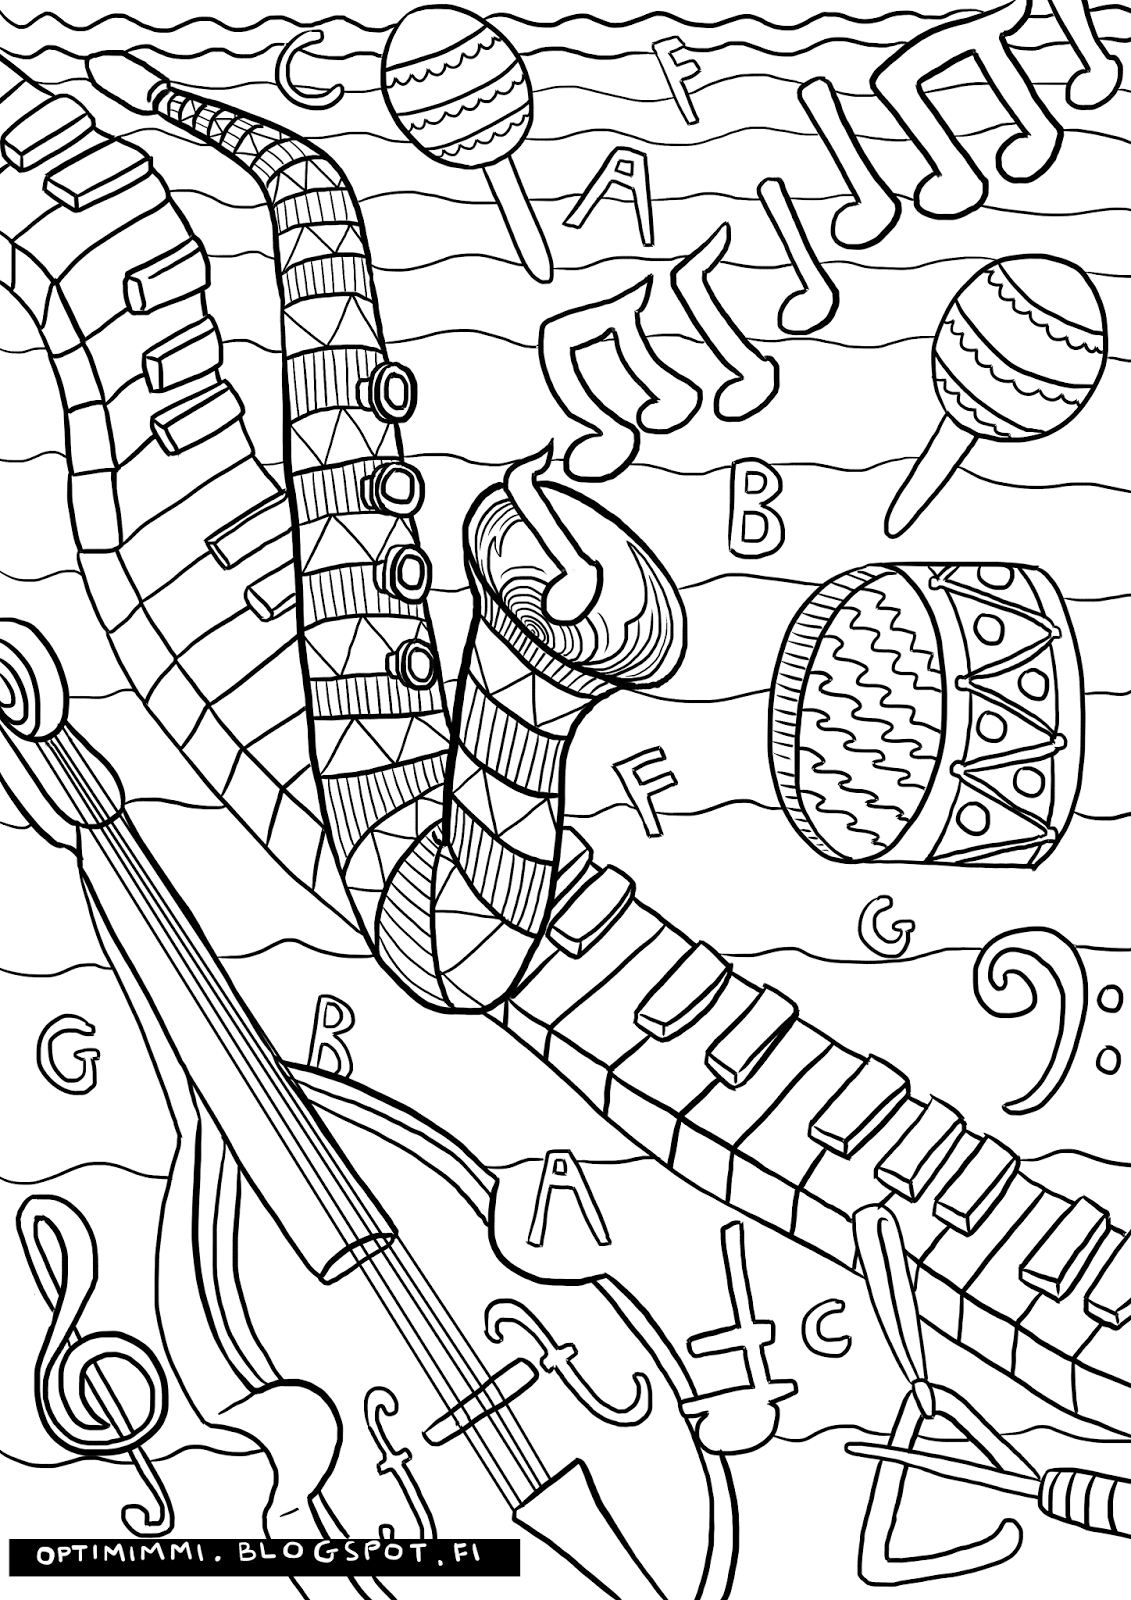 2016 Coloring pages / 2016 Värityskuvat